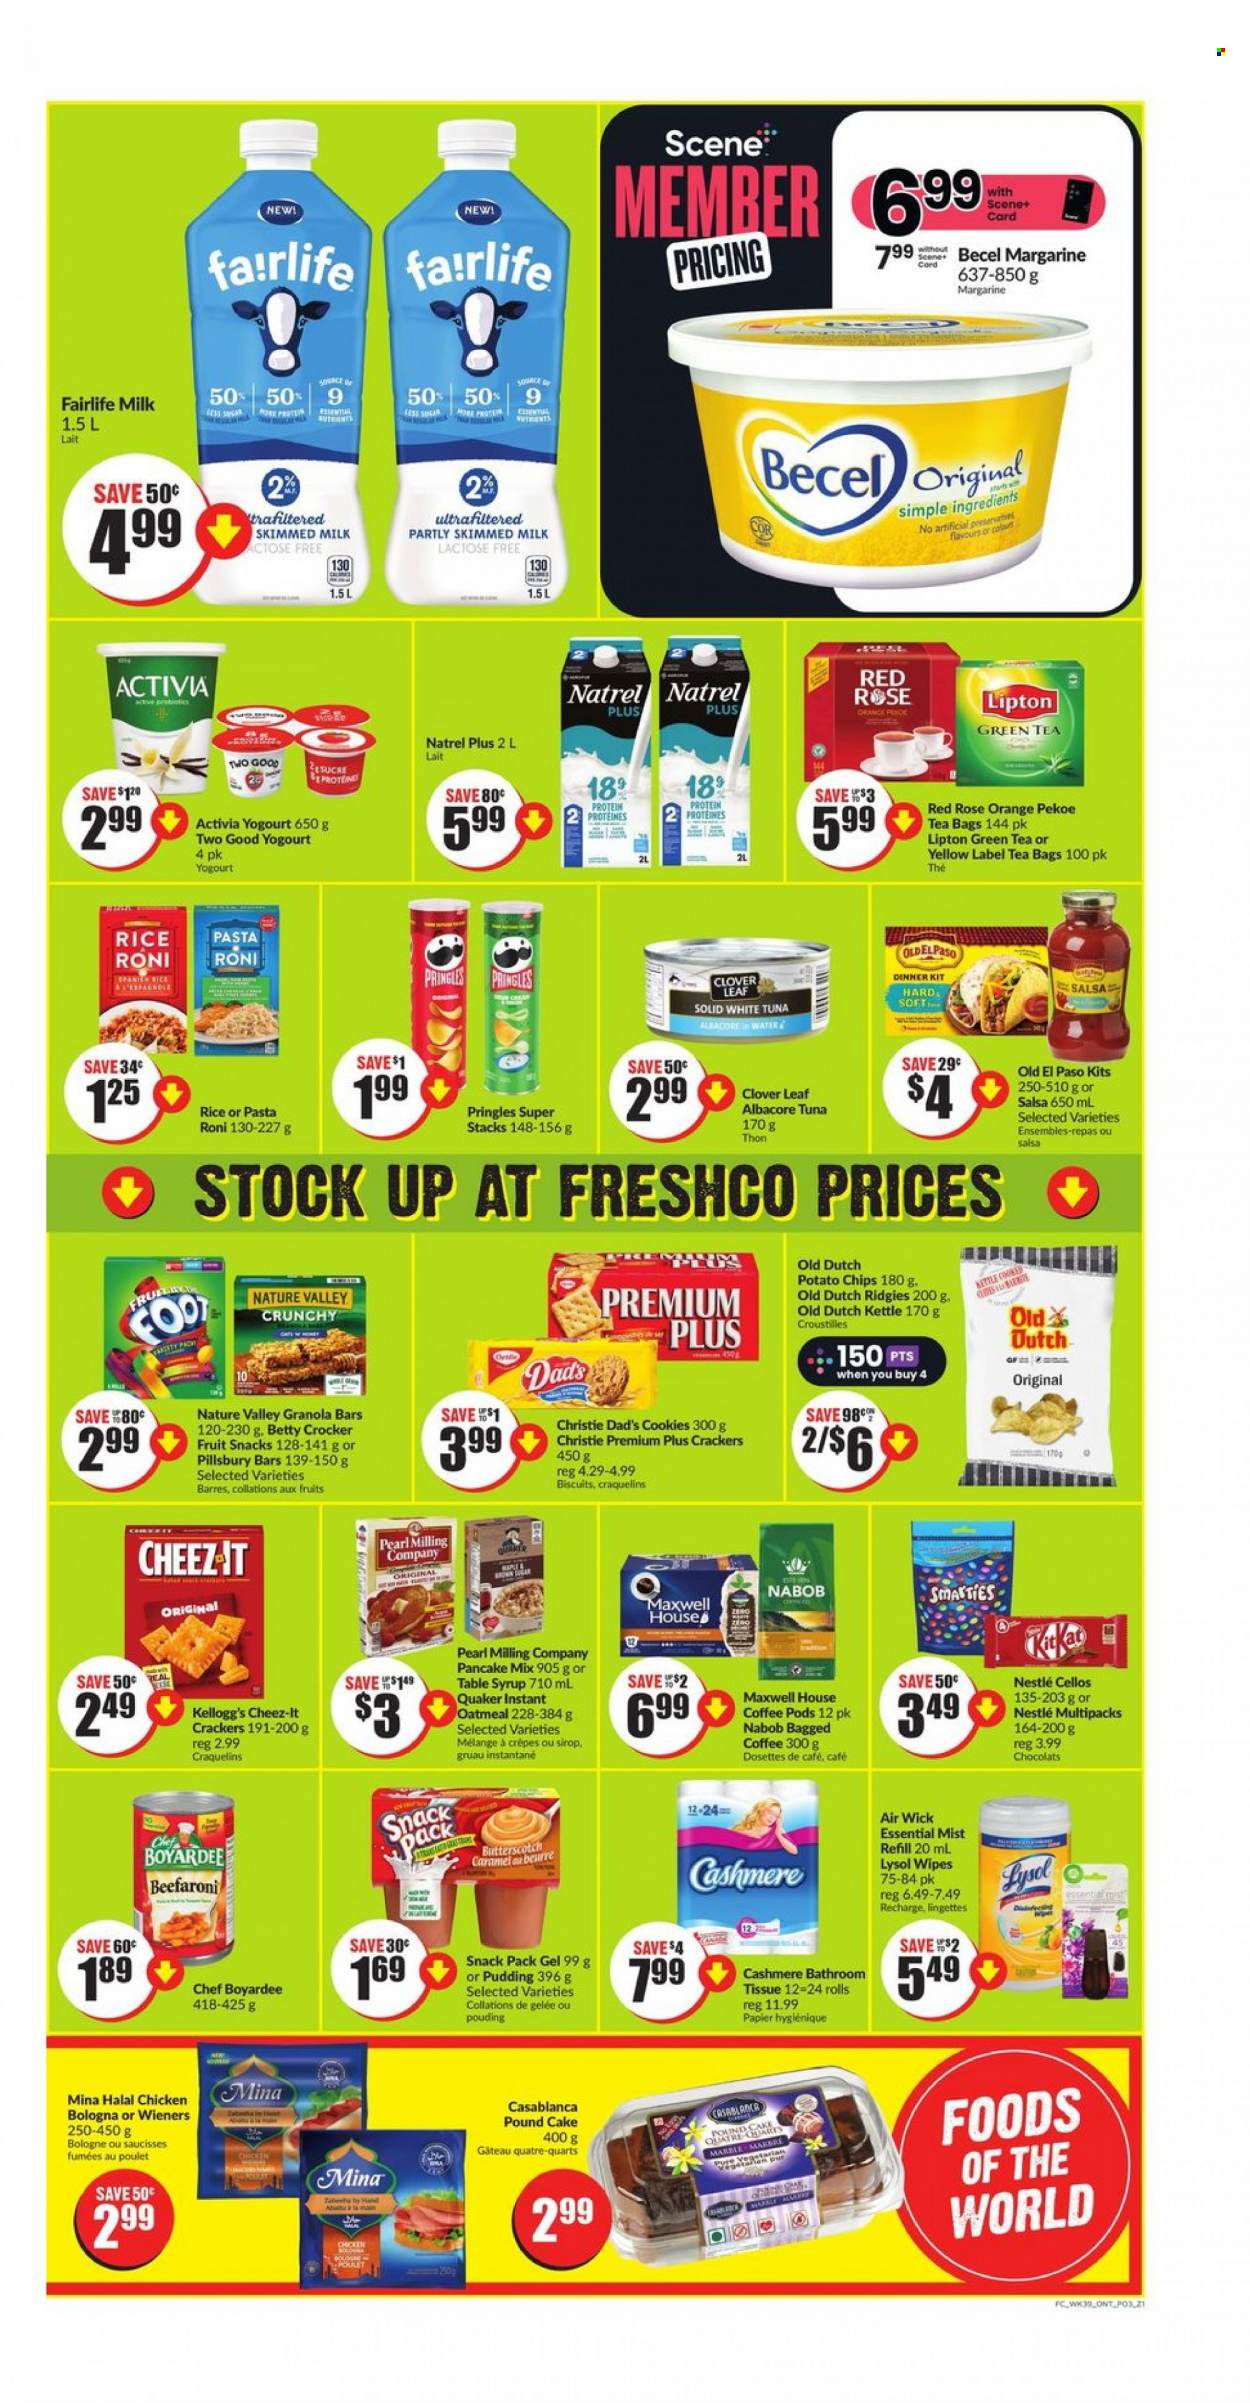 thumbnail - FreshCo. Flyer - January 26, 2023 - February 01, 2023 - Sales products - cake, Old El Paso, oranges, tuna, pancakes, Pillsbury, dinner kit, Quaker, bologna sausage, pudding, Clover, Activia, milk, margarine, butterscotch, cookies, crackers, Kellogg's, biscuit, fruit snack, potato chips, Pringles, chips, Cheez-It, oatmeal, Chef Boyardee, granola bar, Nature Valley, brown rice, caramel, salsa, syrup, green tea, Maxwell House, tea bags, coffee, coffee pods, bagged coffee, wine, rosé wine, bath tissue, wipes, Lysol, rose, probiotics, Nestlé, Lipton, Smarties. Page 3.